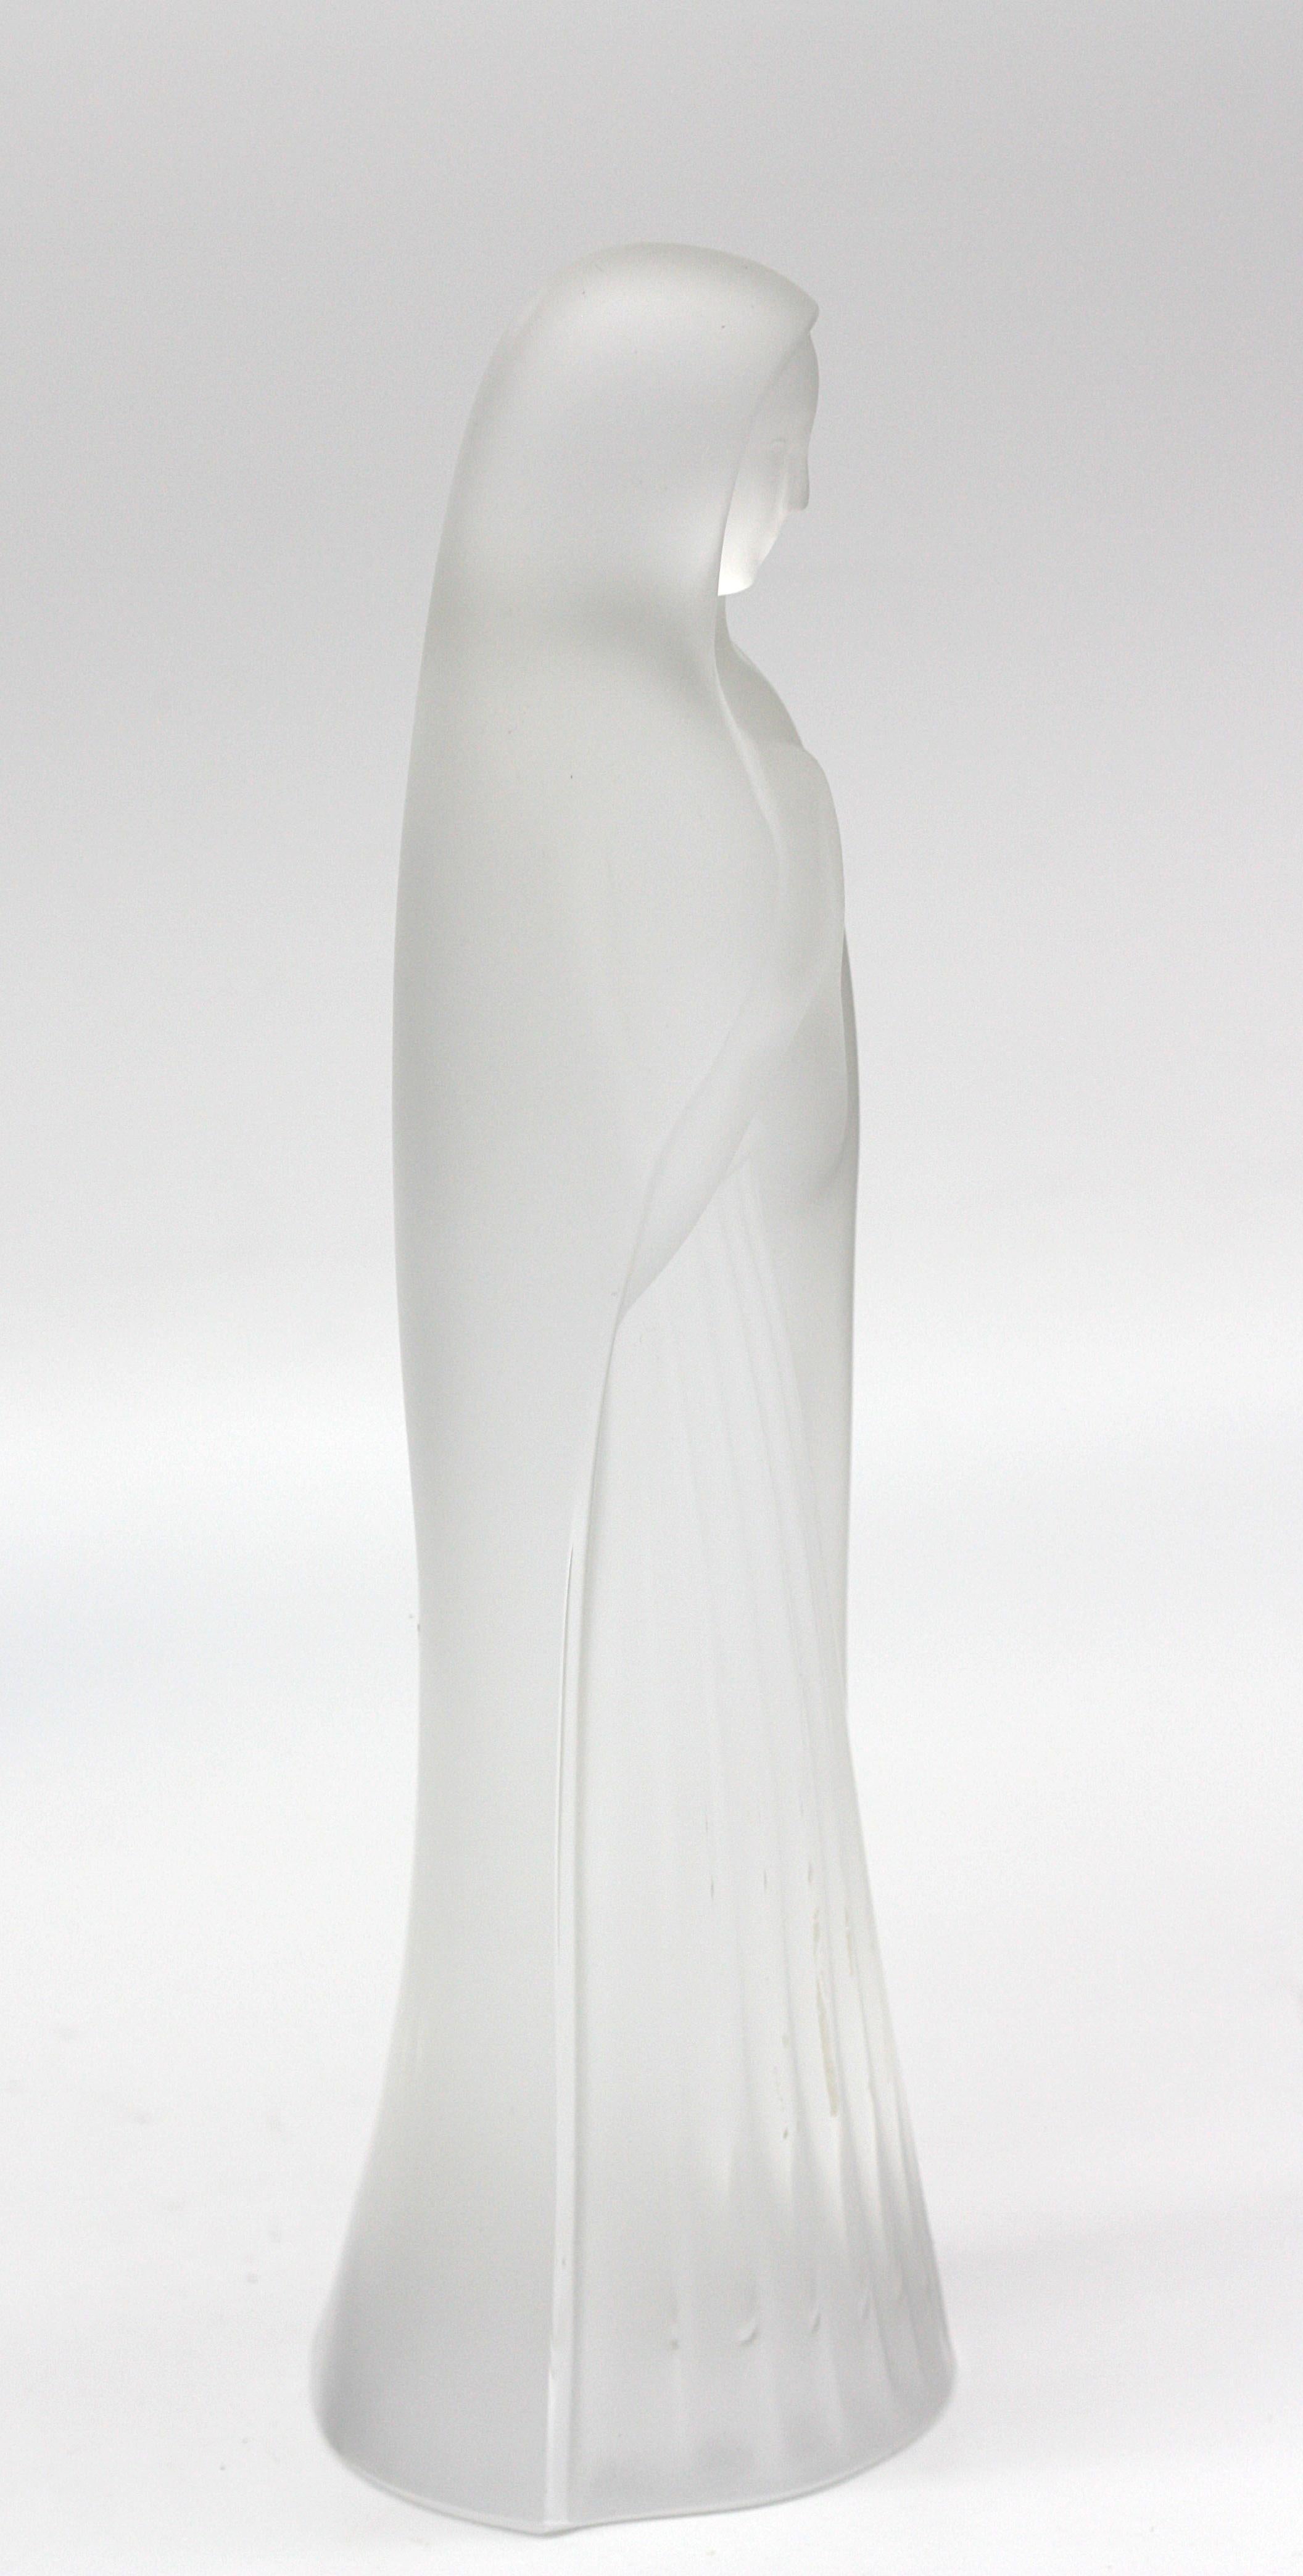 
Lalique Frosted Glass Figure of a Madonna
The underside with etched Lalique France signature. The standing figure with arms clasped in prayer.
Height 9.5 in. (24.13 cm.).